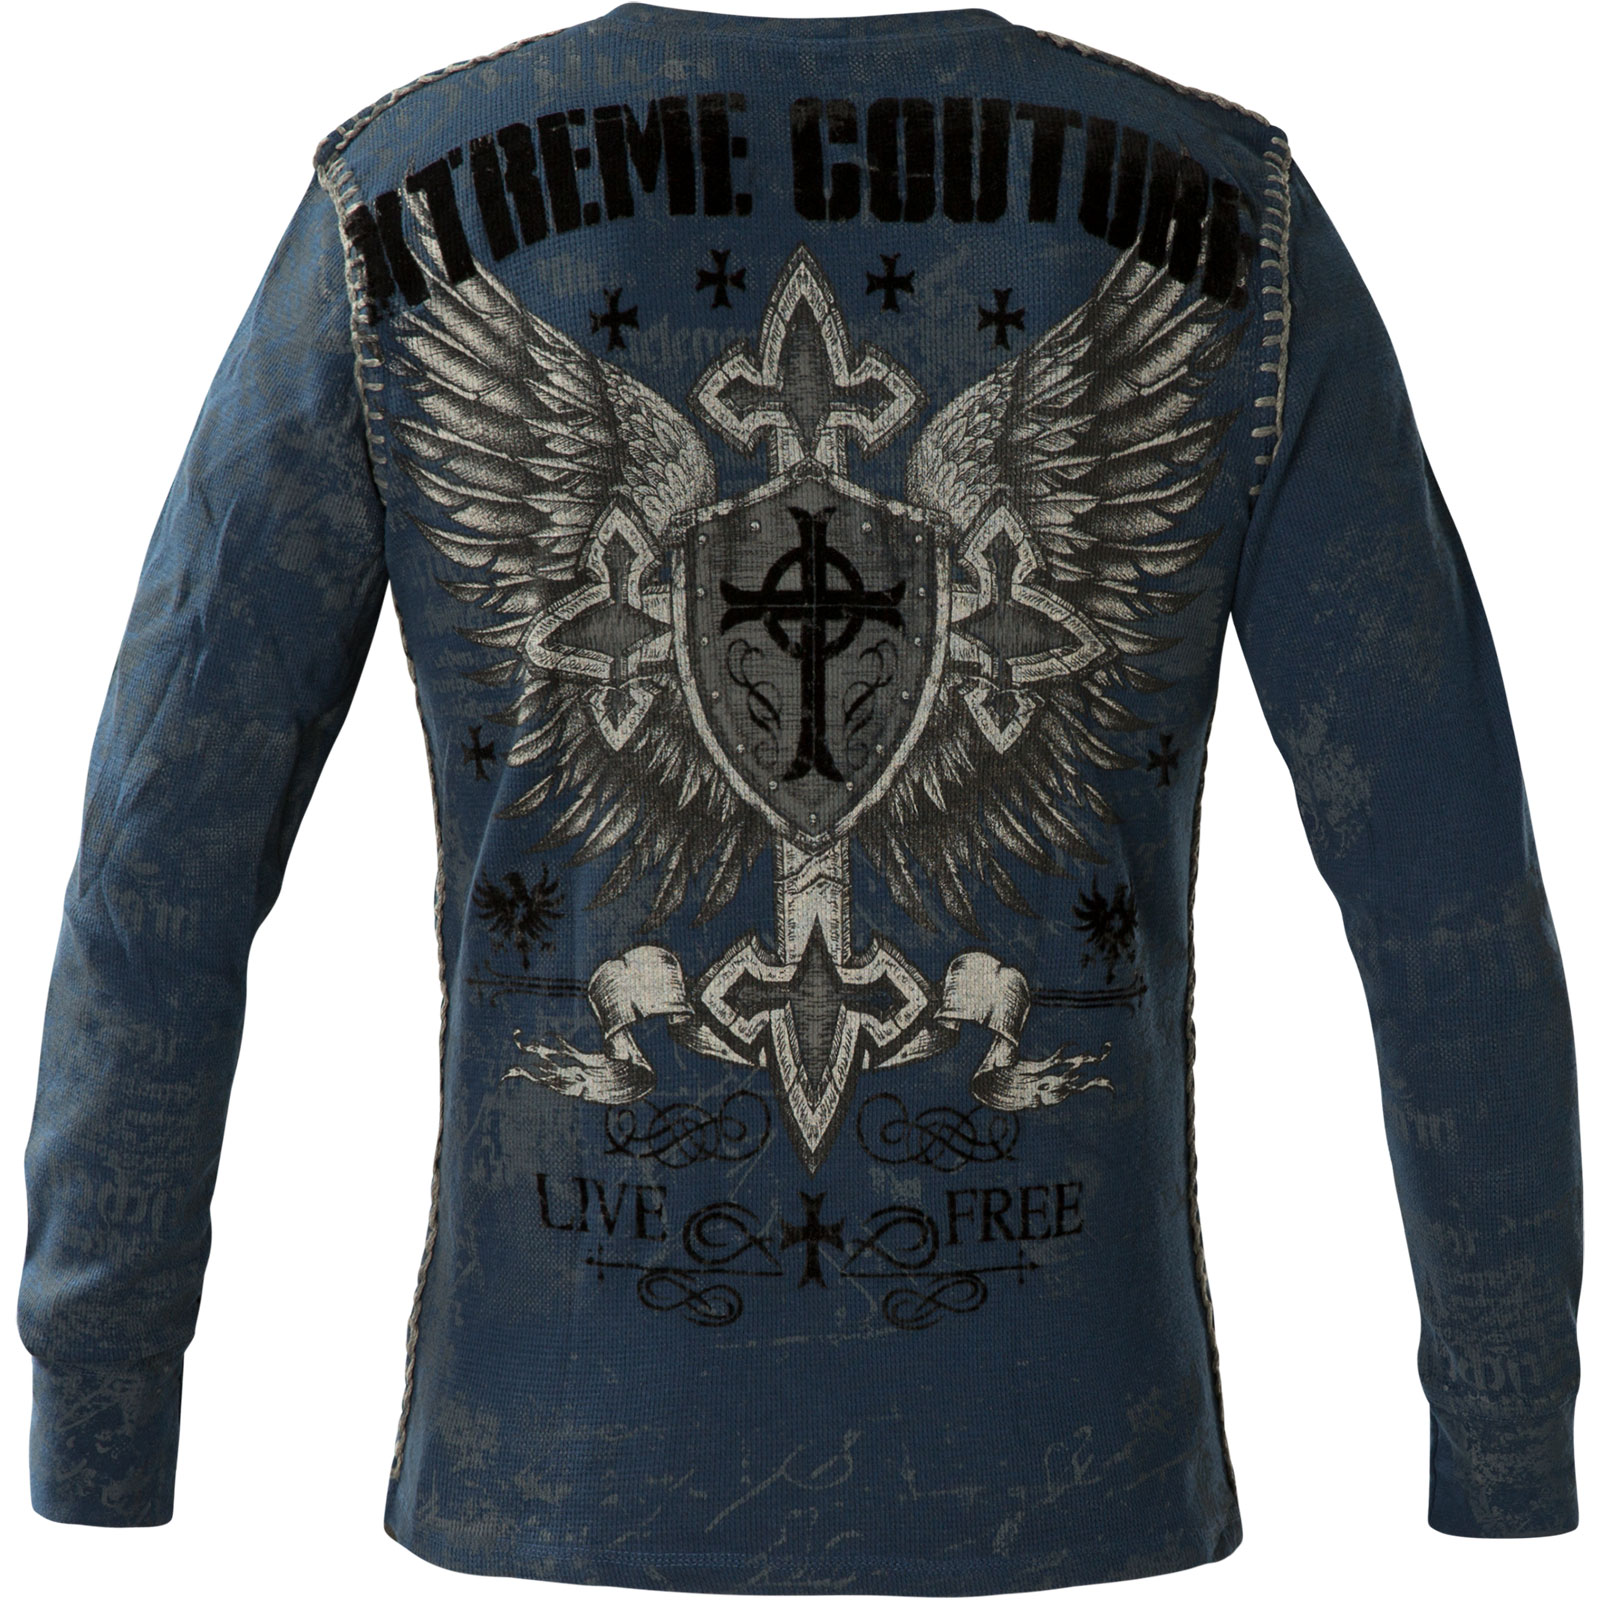 Xtreme Couture by Affliction Thermal Pro Faith Print with large cross